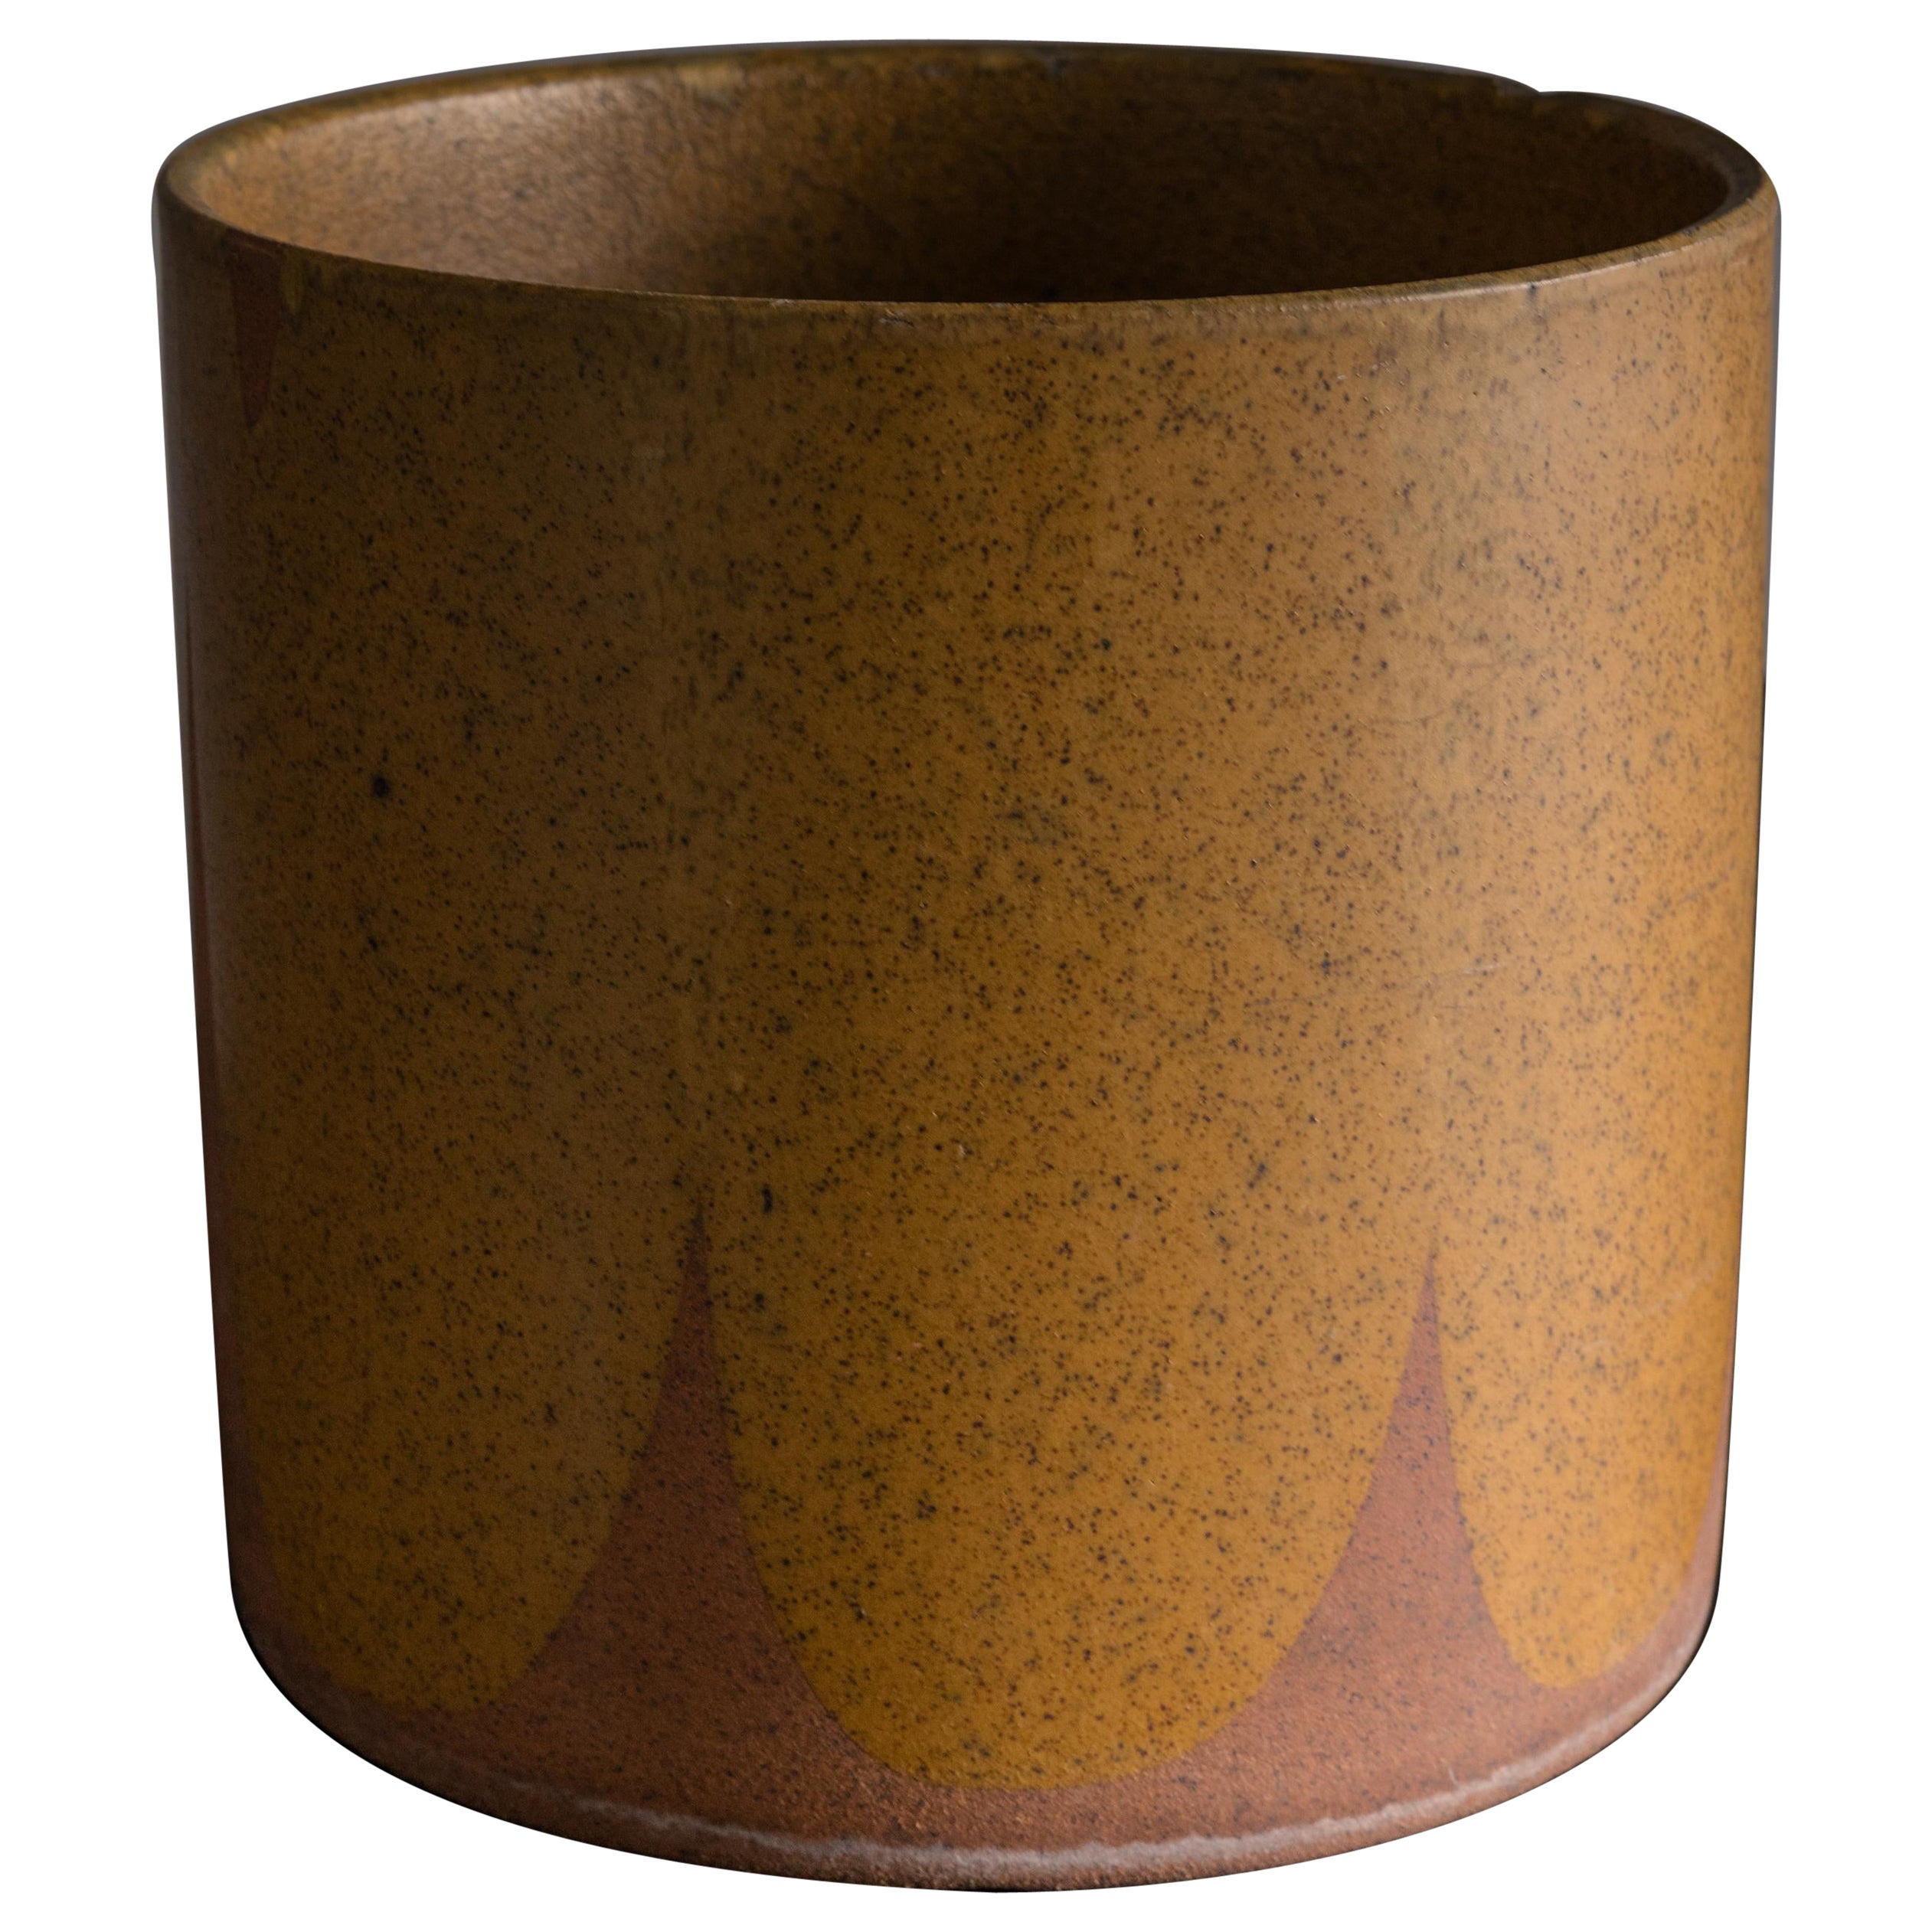 Model 4028 "Flame Glaze" Pro/Artisan Planter by David Cressey for AP For Sale